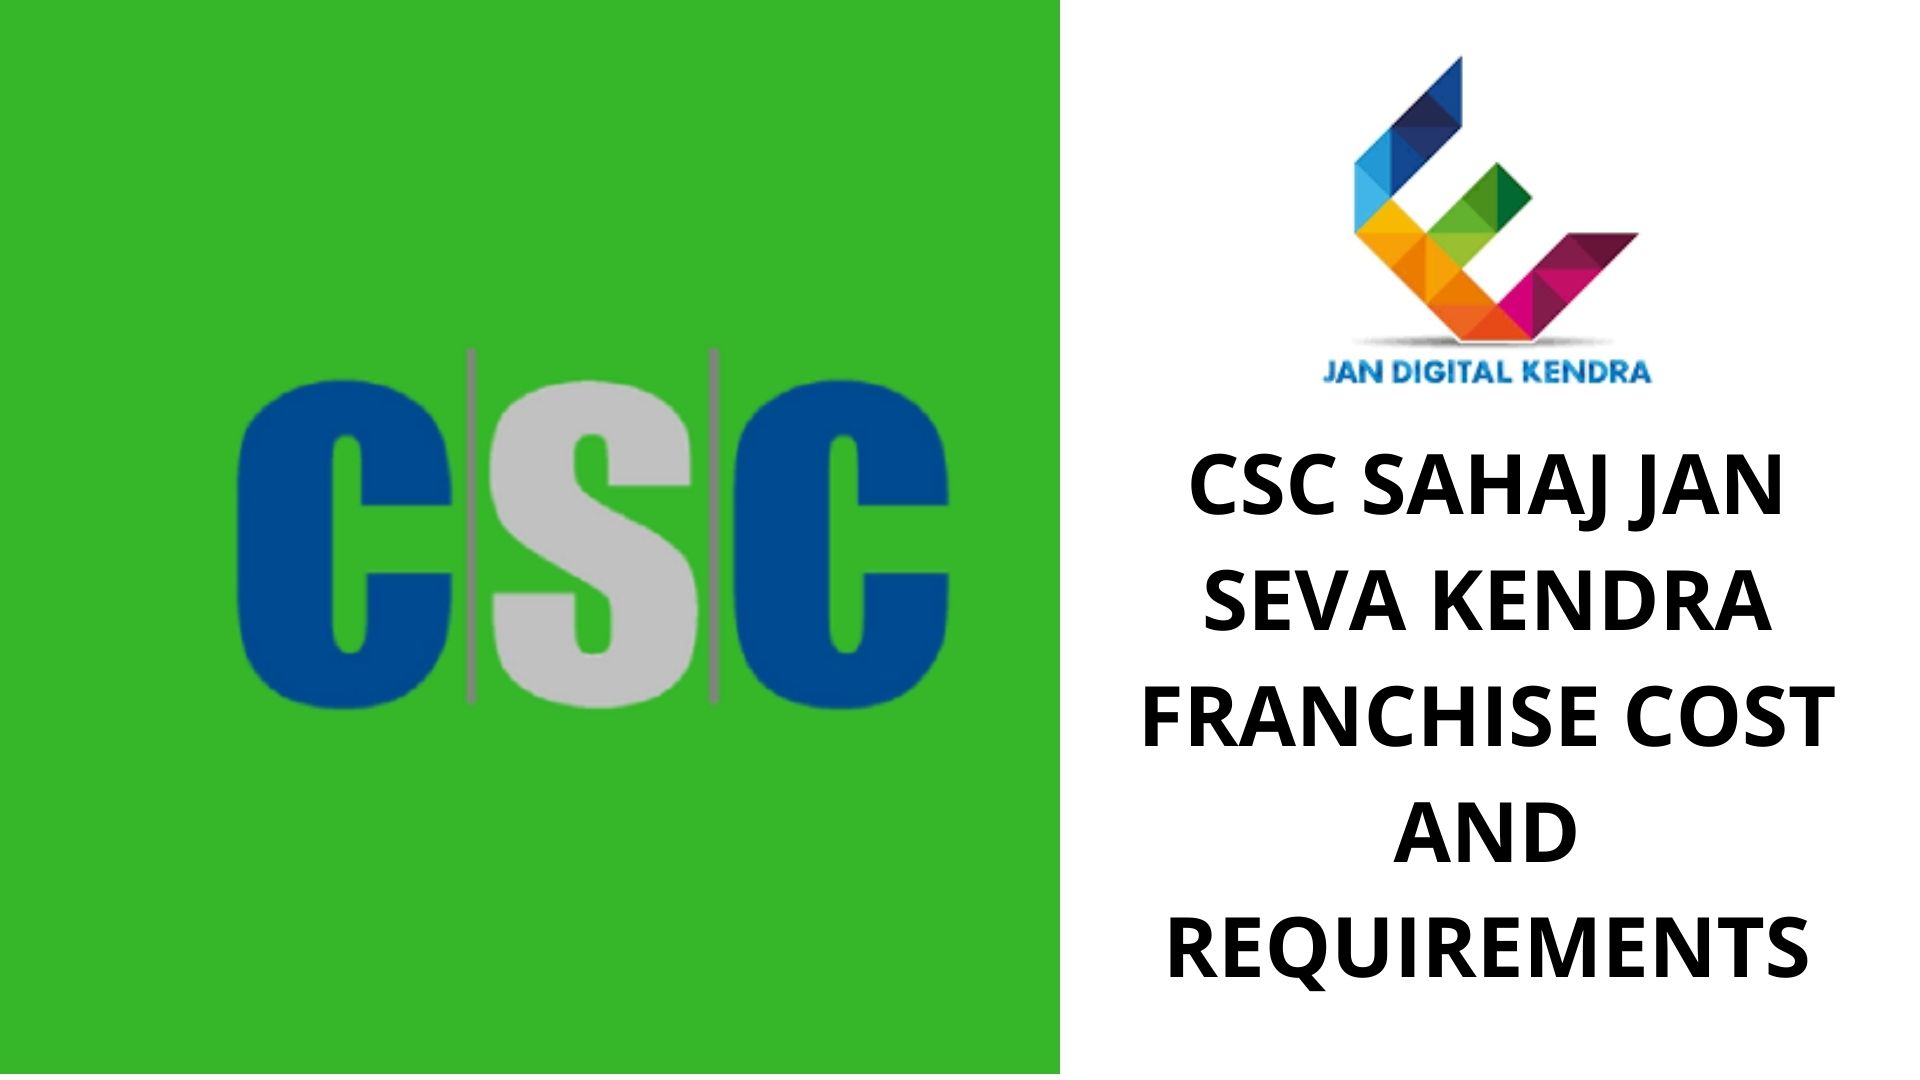 What are the CSC Sahaj Jan Seva Kendra franchise cost and requirements